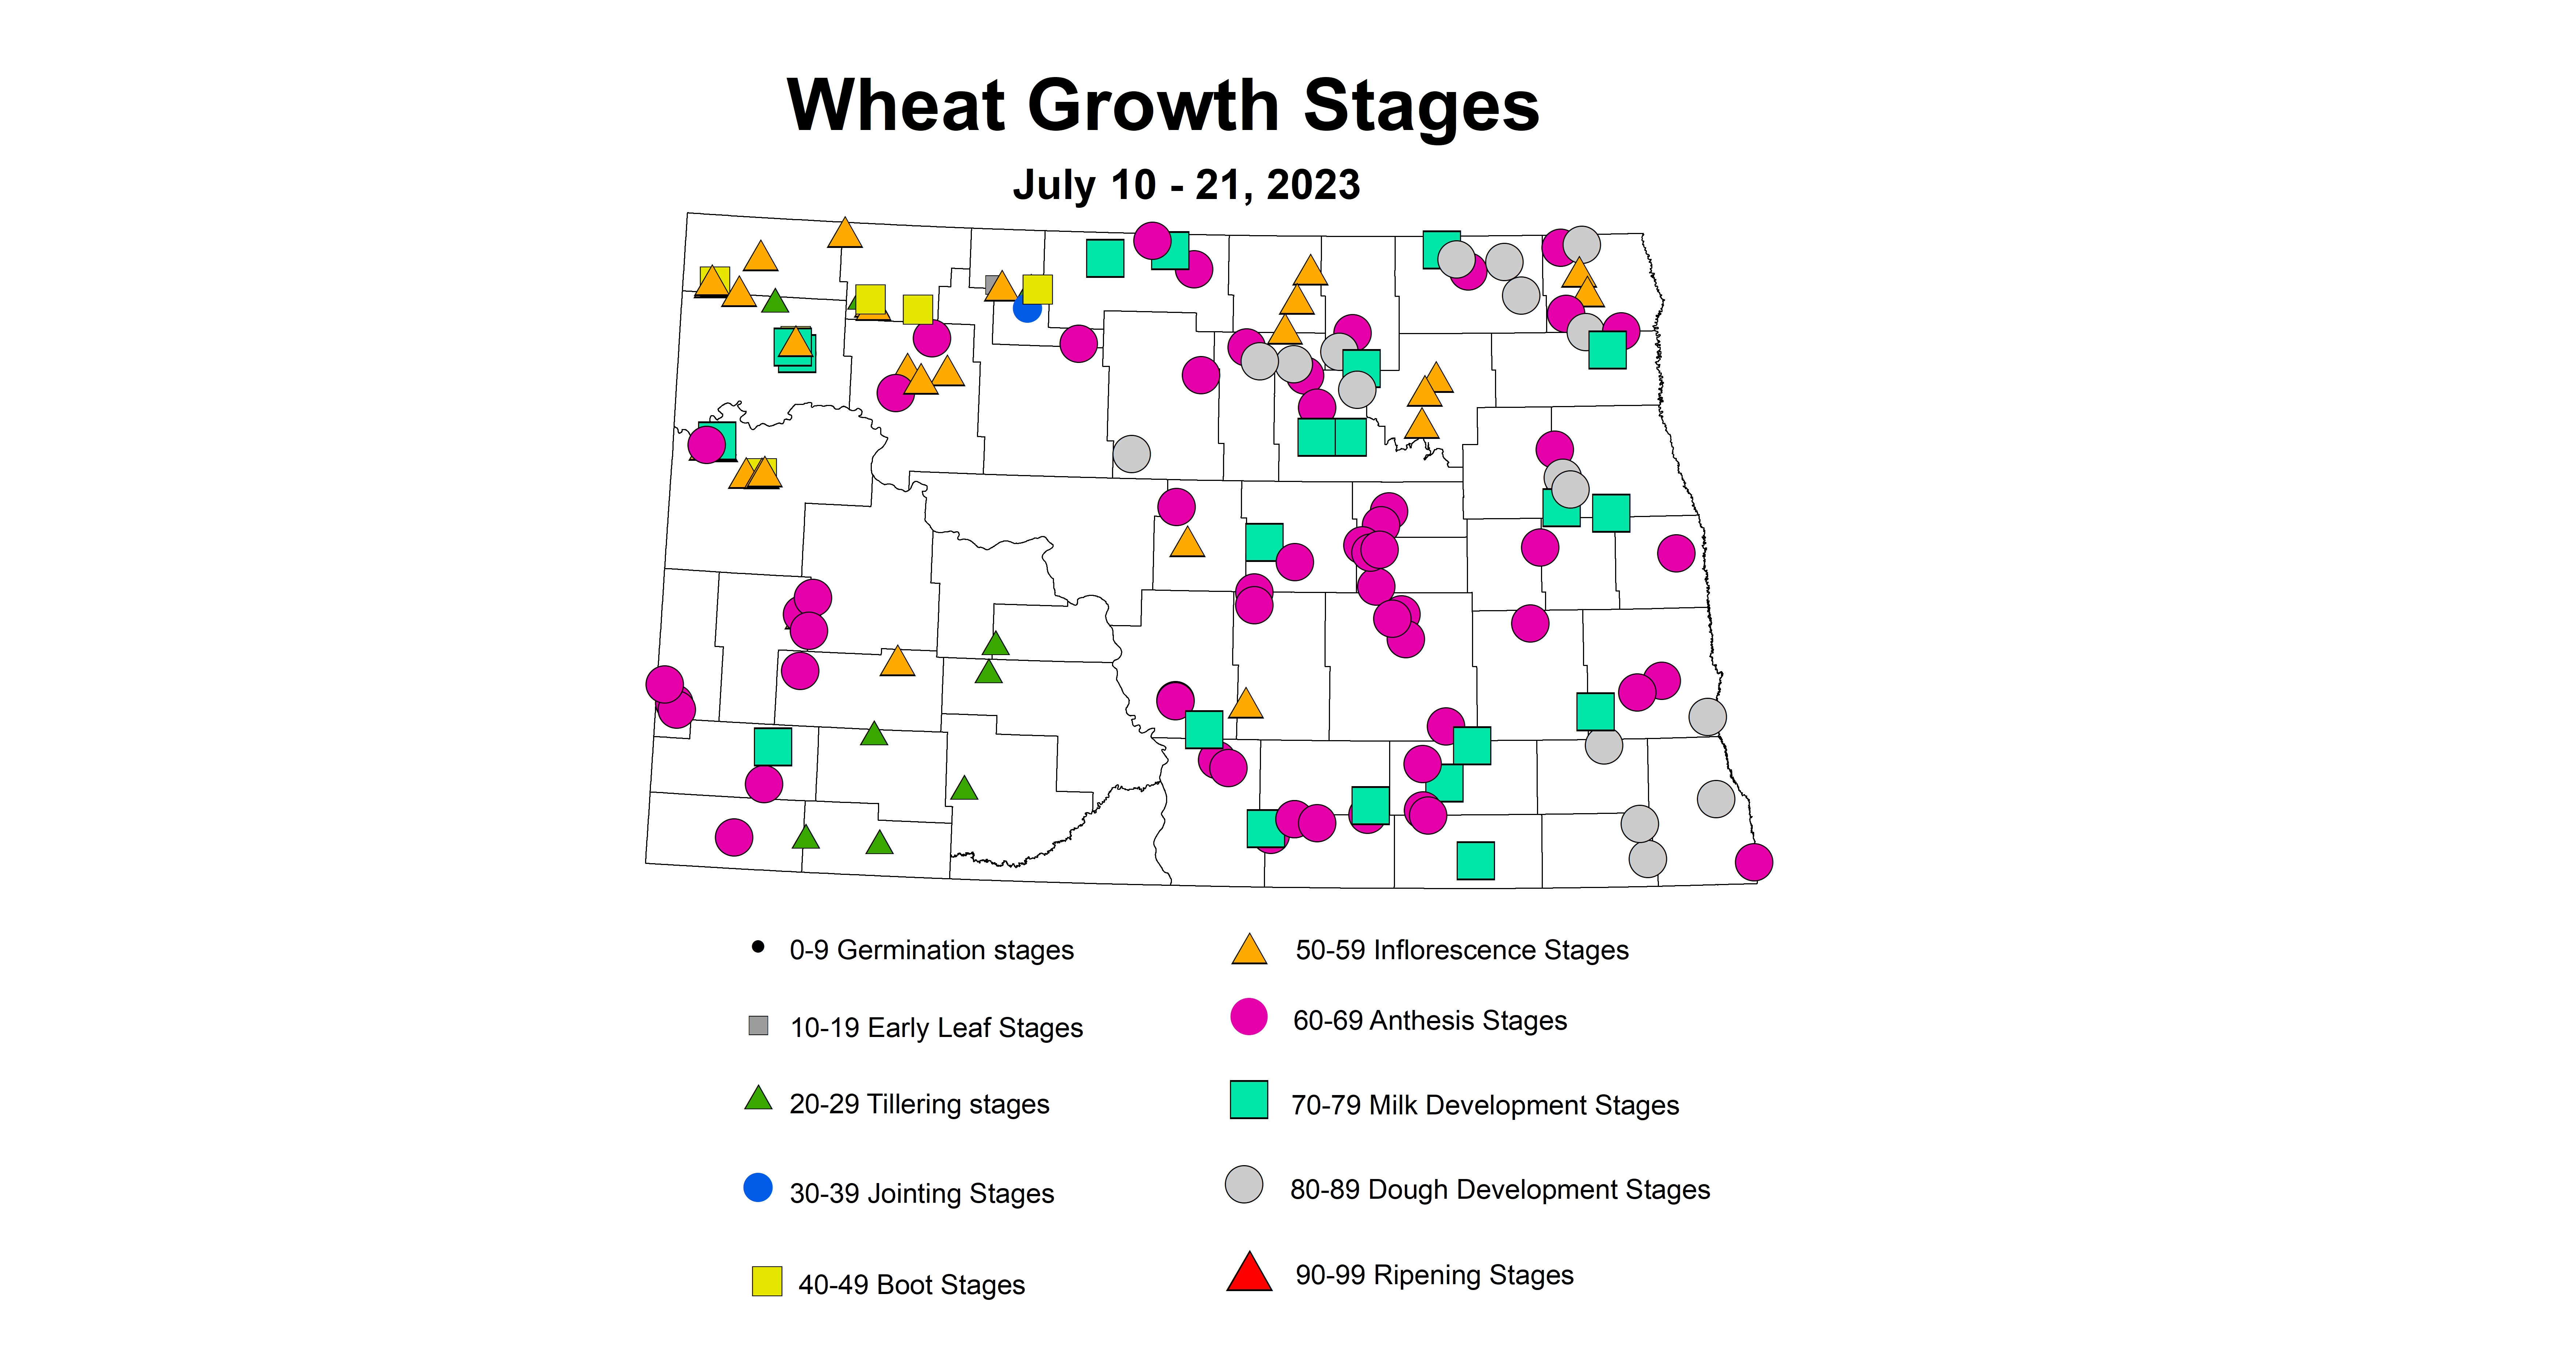 wheat growth stages July 10-21 2023